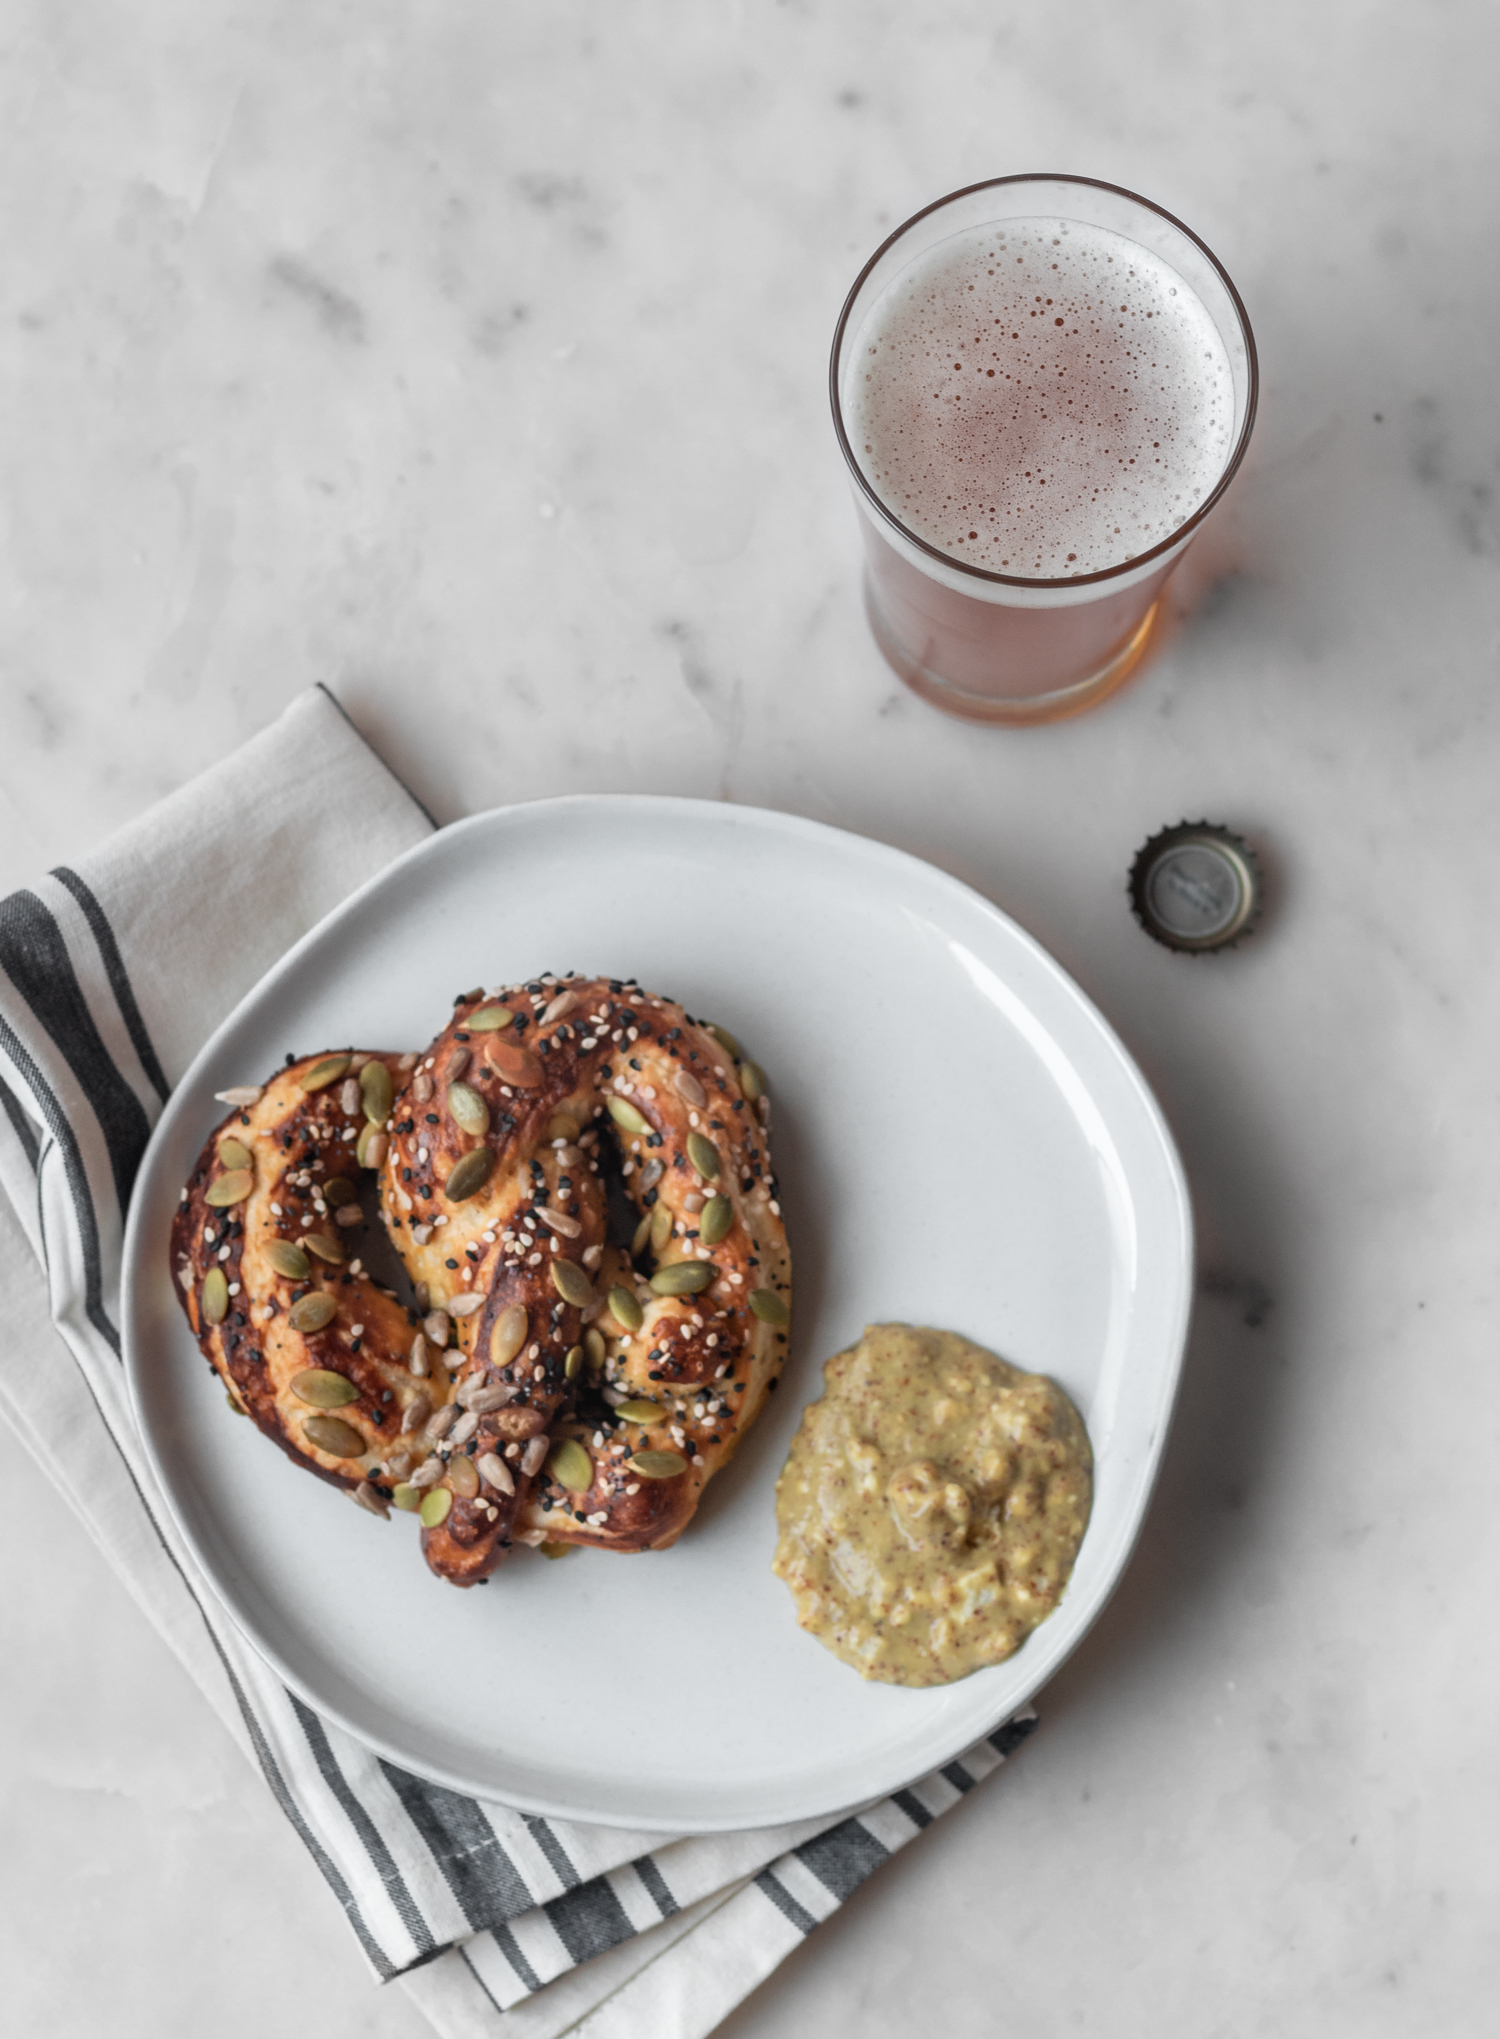 A soft pretzel on a plate sitting on a folded striped napkin on a white background. Glass of beer in the corner.